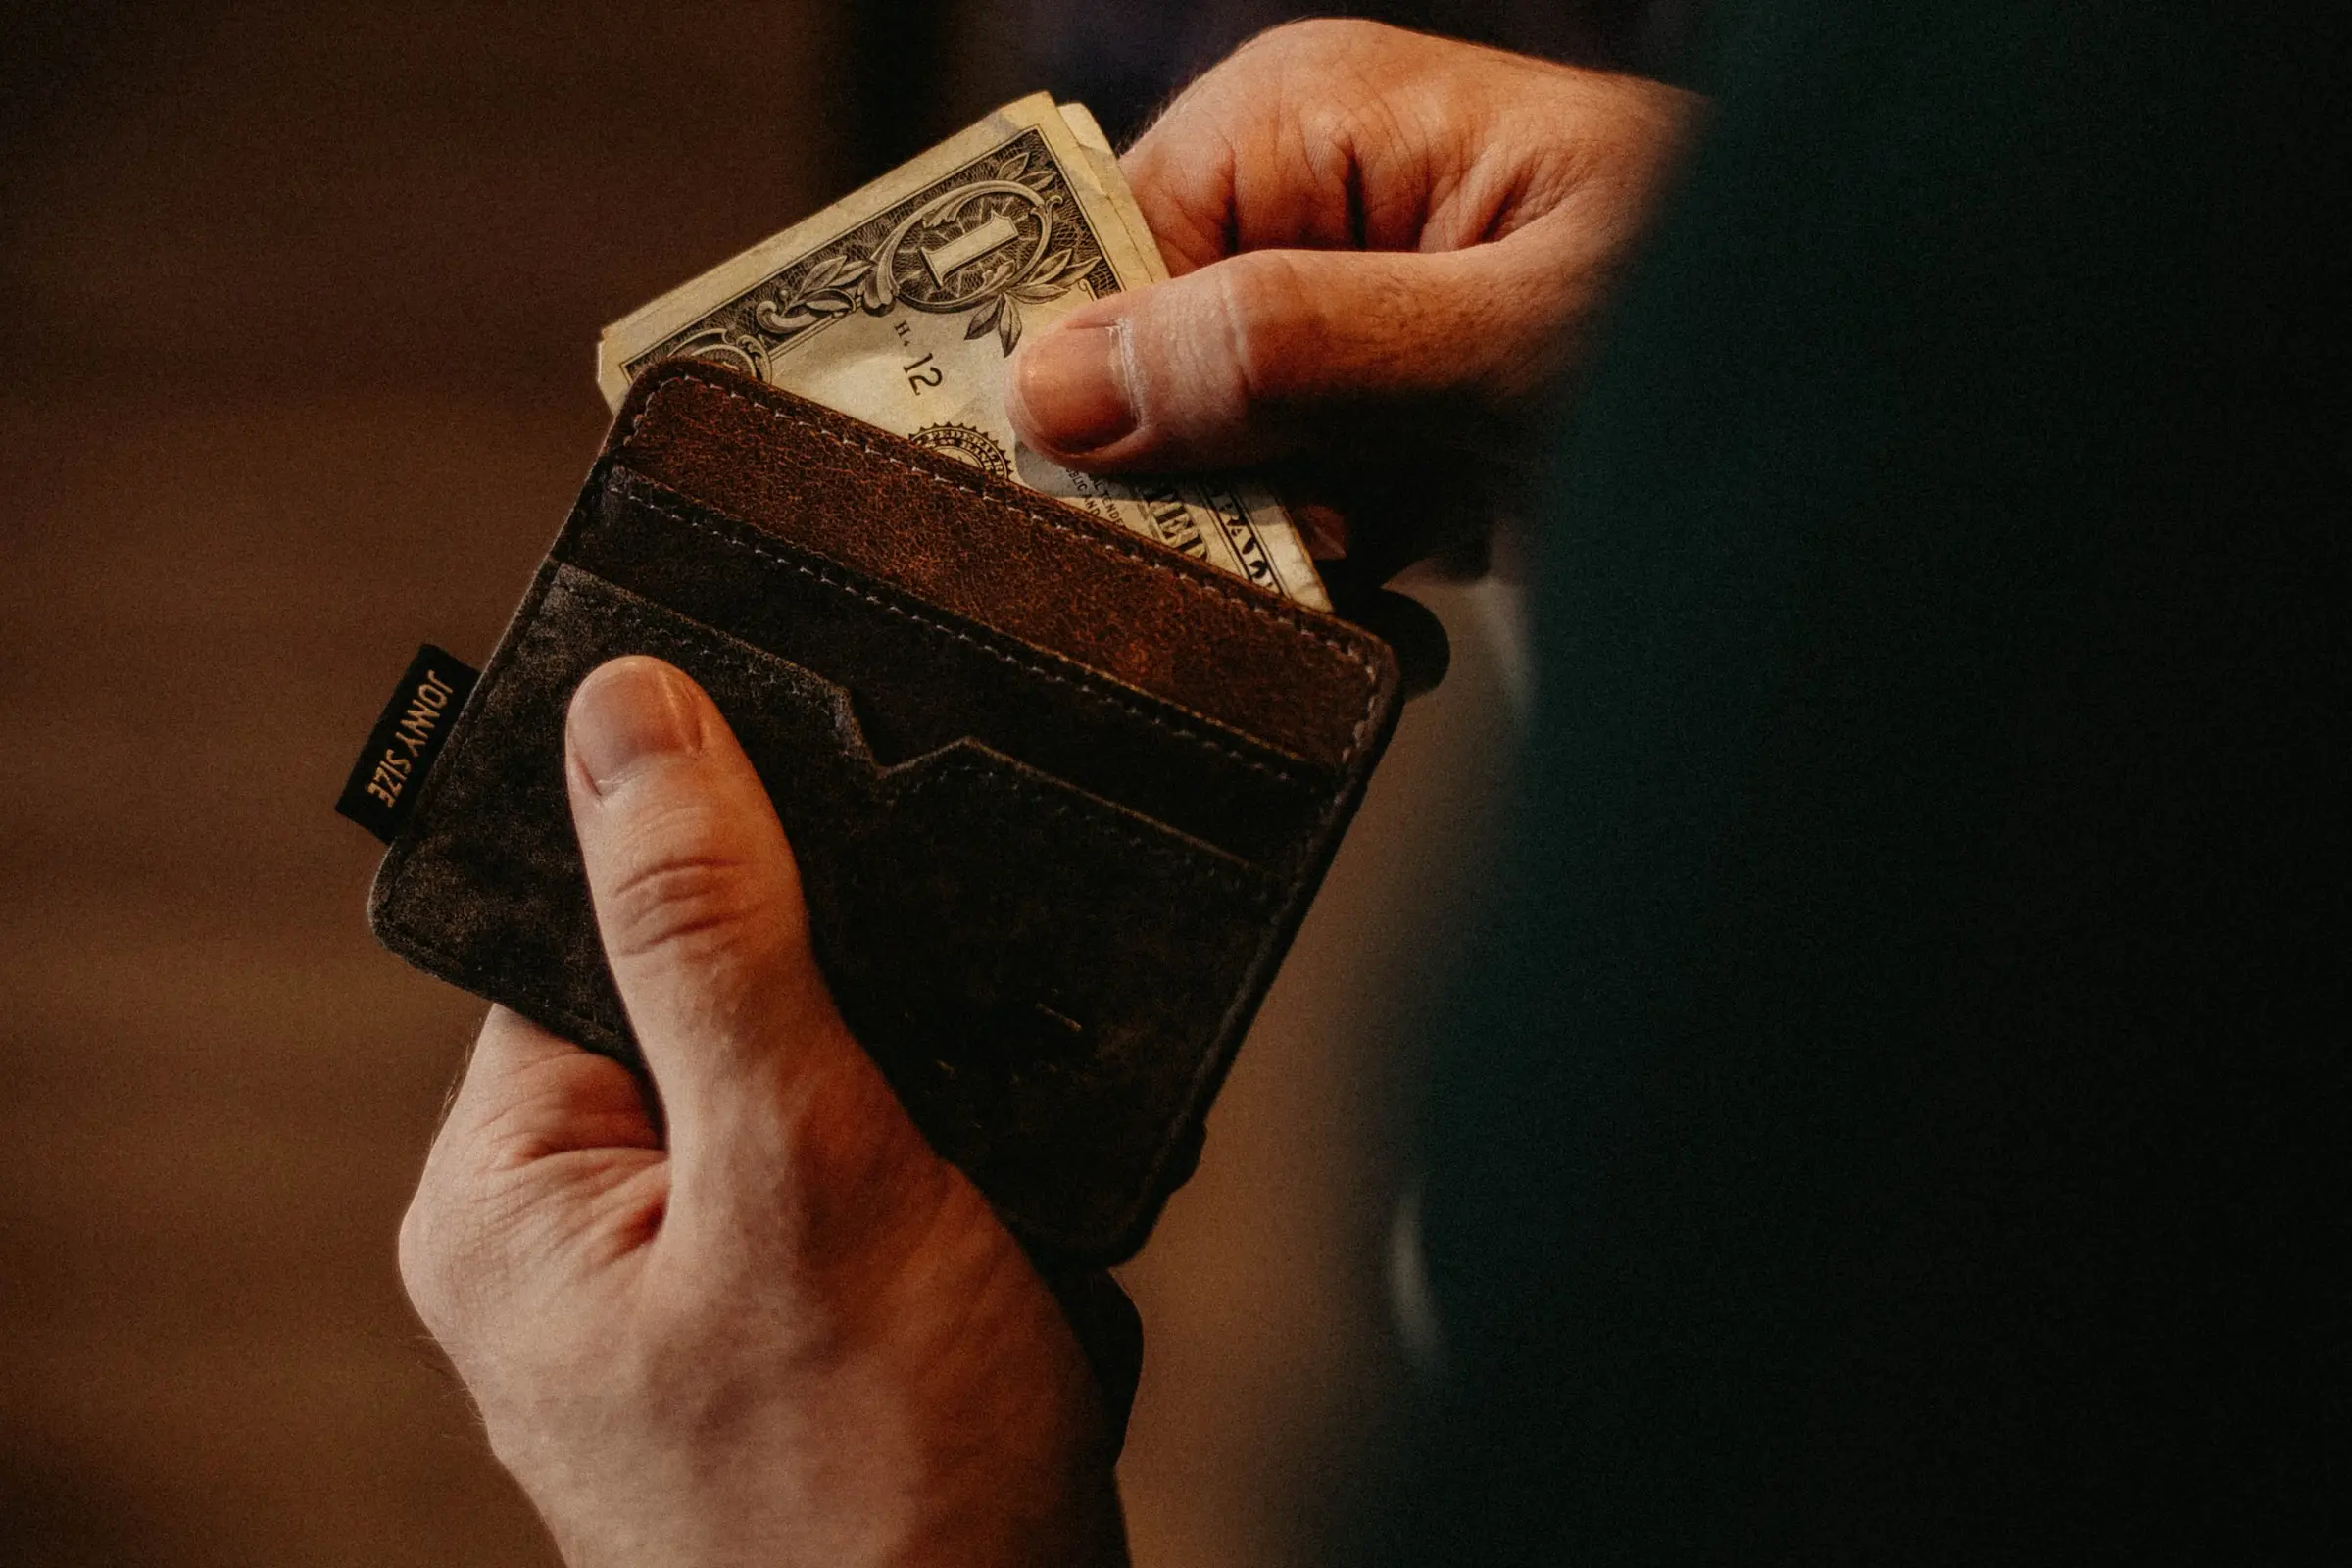 Individual removing a dollar bill from their wallet